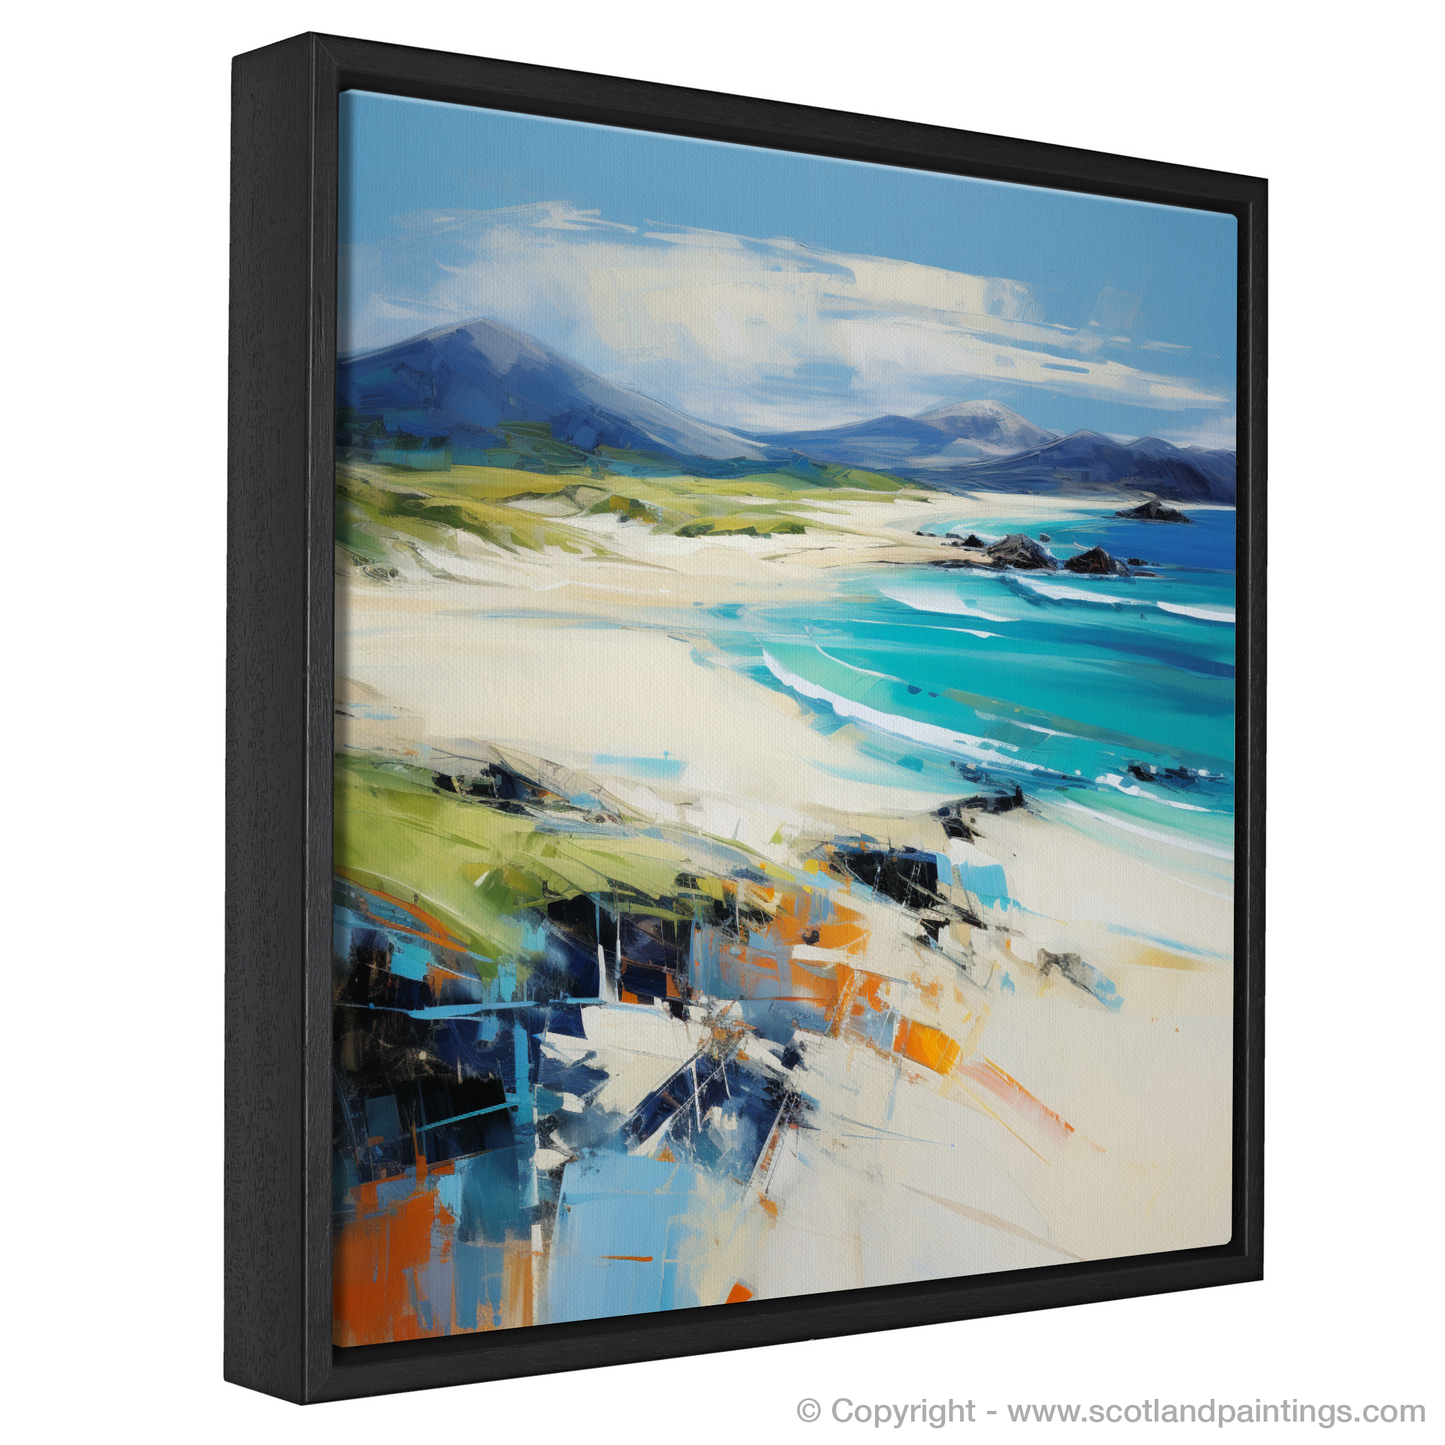 Painting and Art Print of Luskentyre Beach, Isle of Harris entitled "Captivating Luskentyre: An Expressionist Tribute to Scottish Shores".